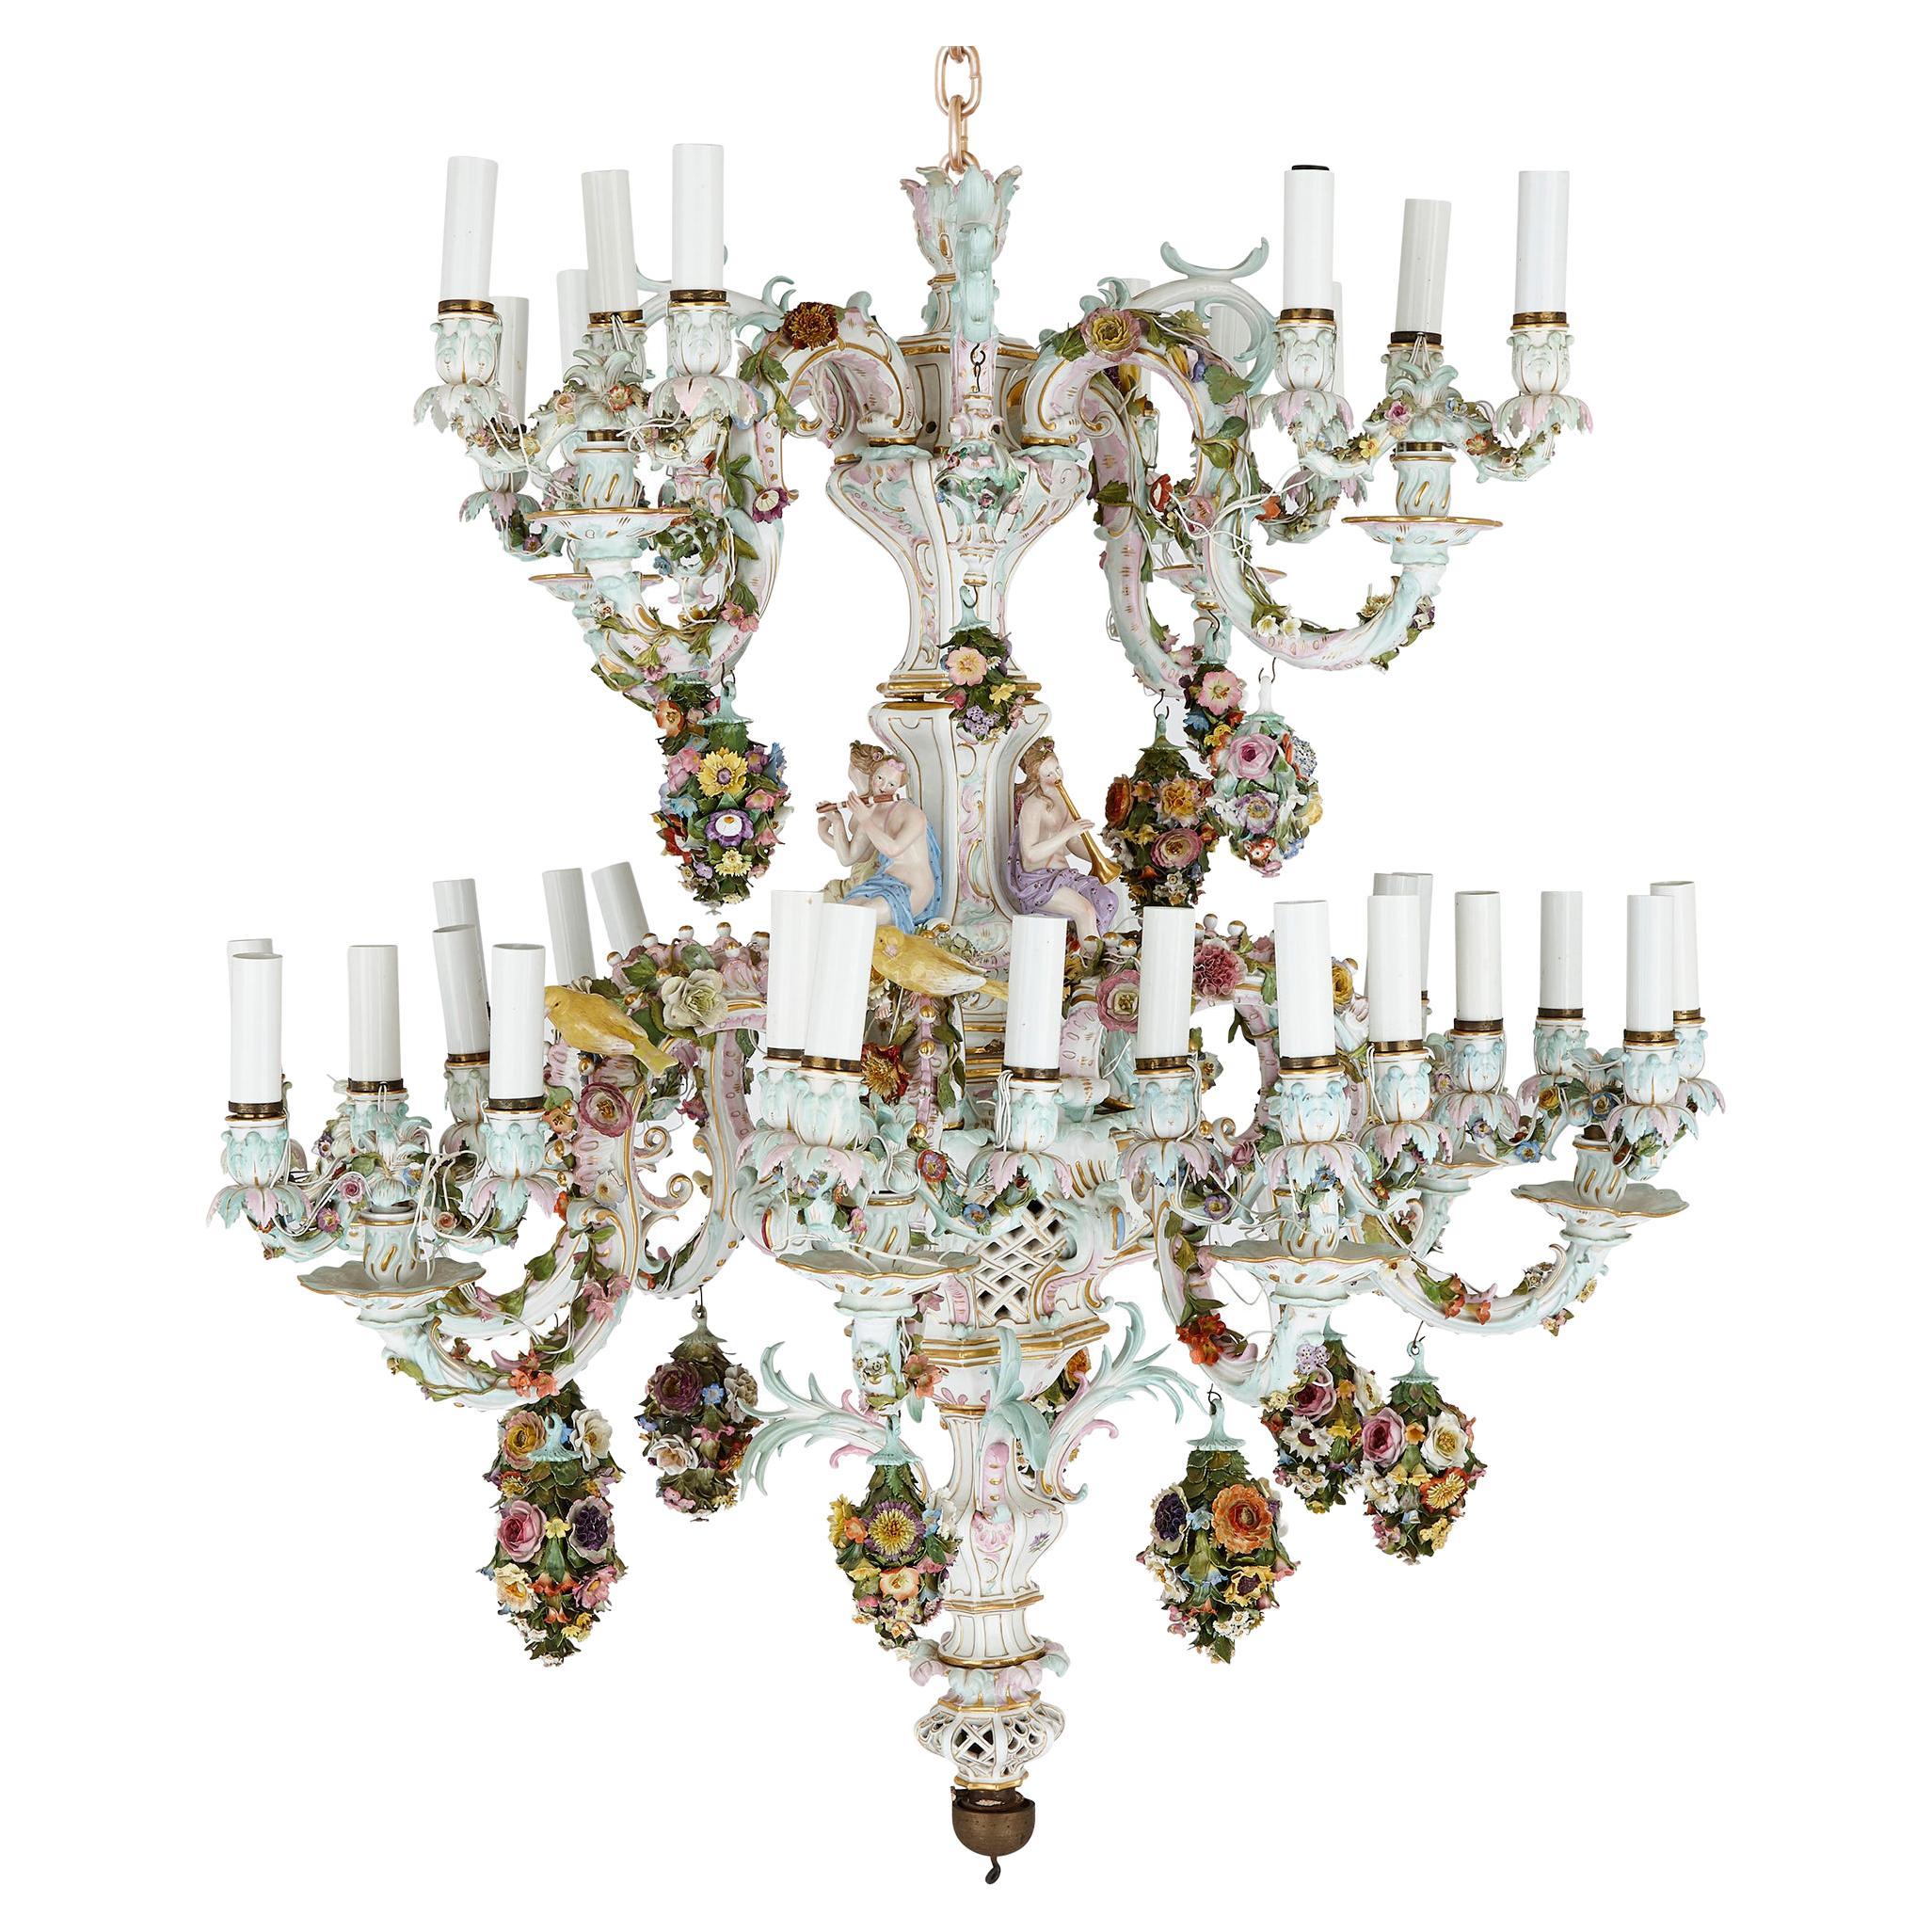 Large Rococo Style Porcelain Chandelier by Meissen For Sale